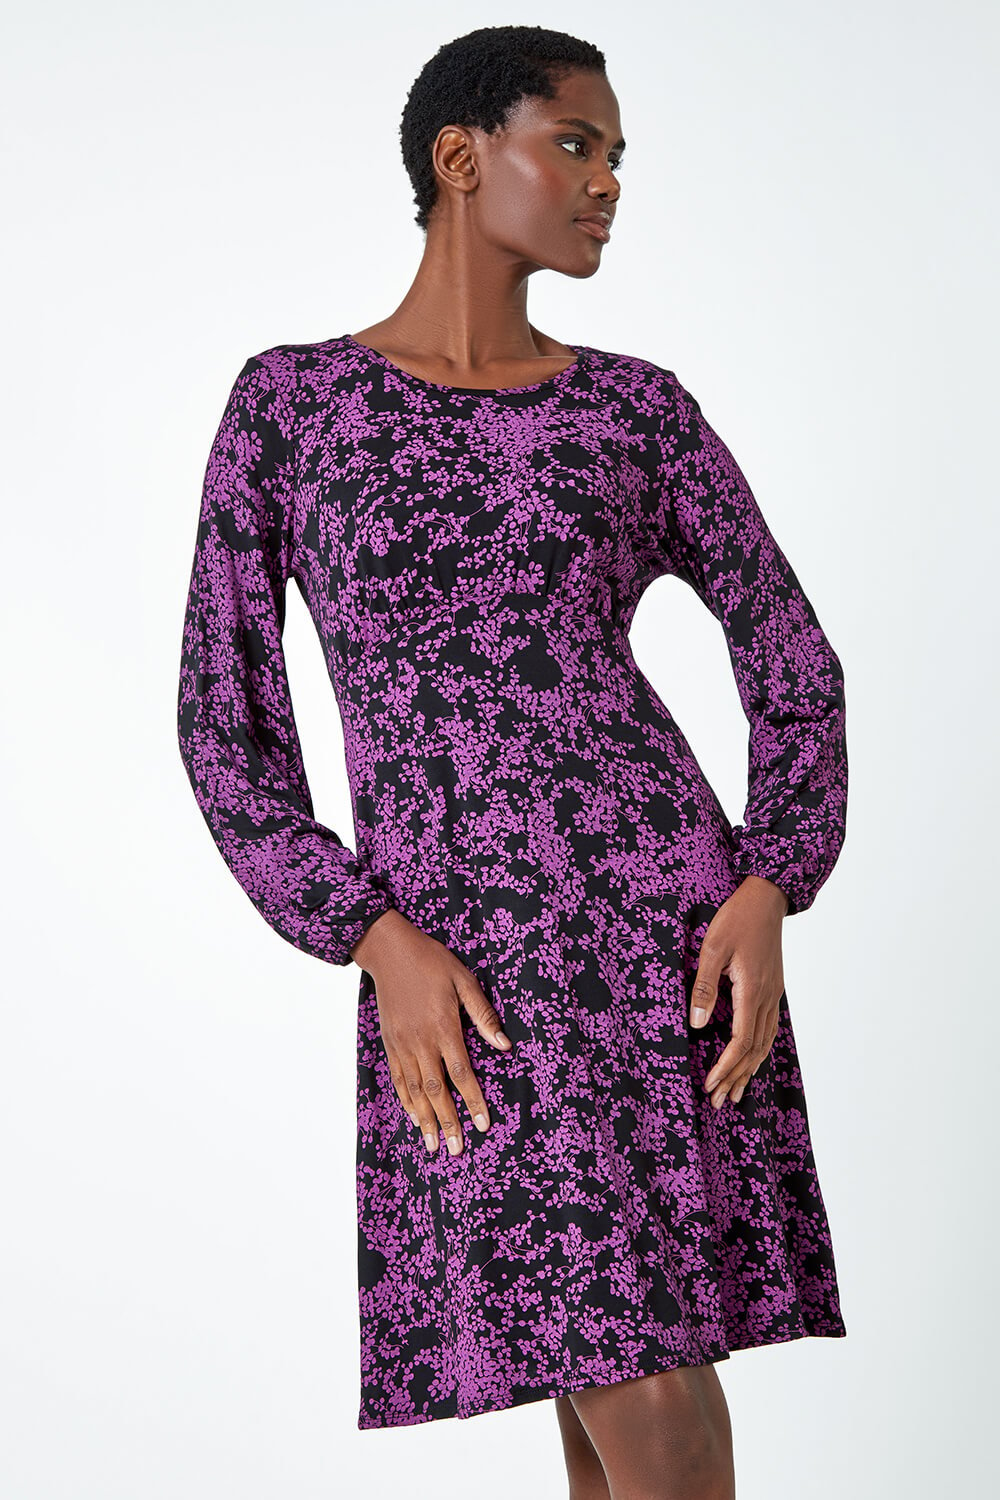 Purple Ditsy Floral Print Stretch Dress, Image 2 of 5